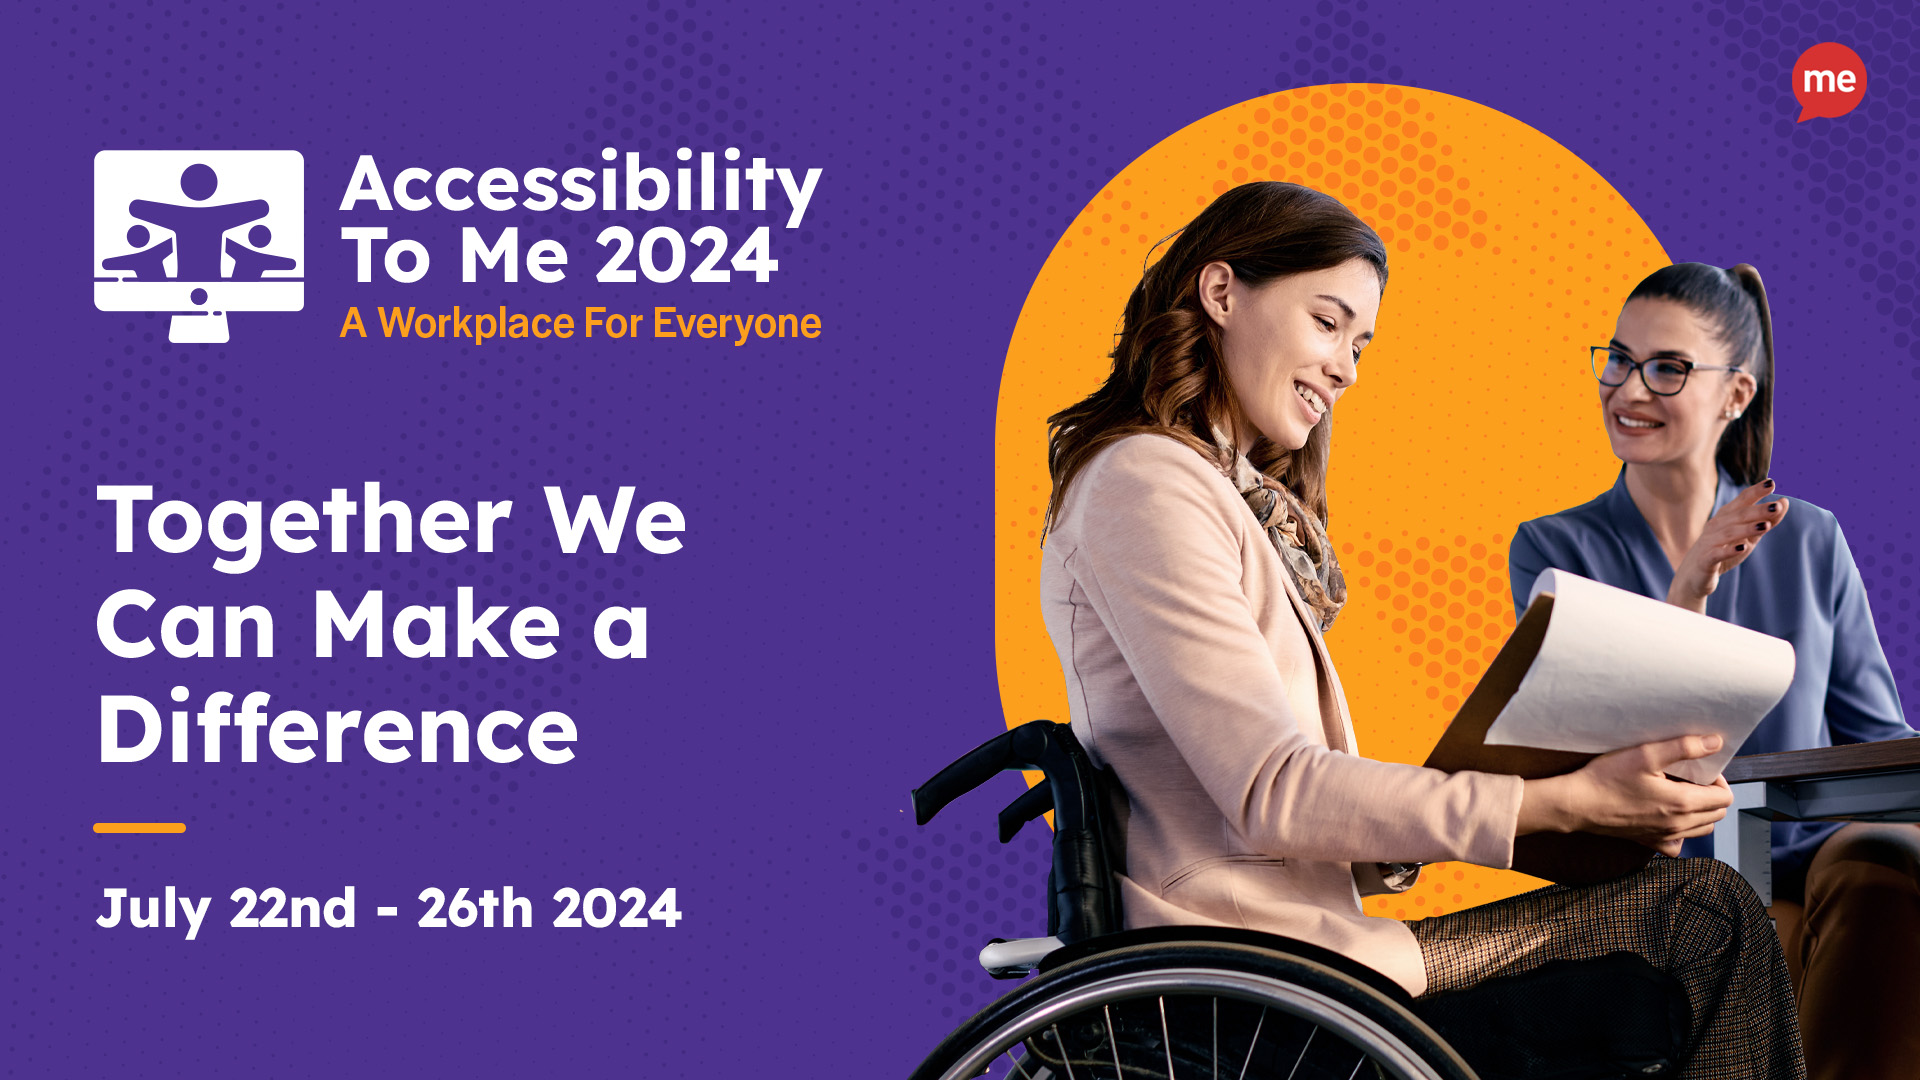 Accessibility to Me 2024. A workplace for everyone. Together we can make a difference. June 22nd - 26th, 2024 with an image of a young woman in a wheelchair holding a clipboard next to a young woman with glasses sitting in a chair